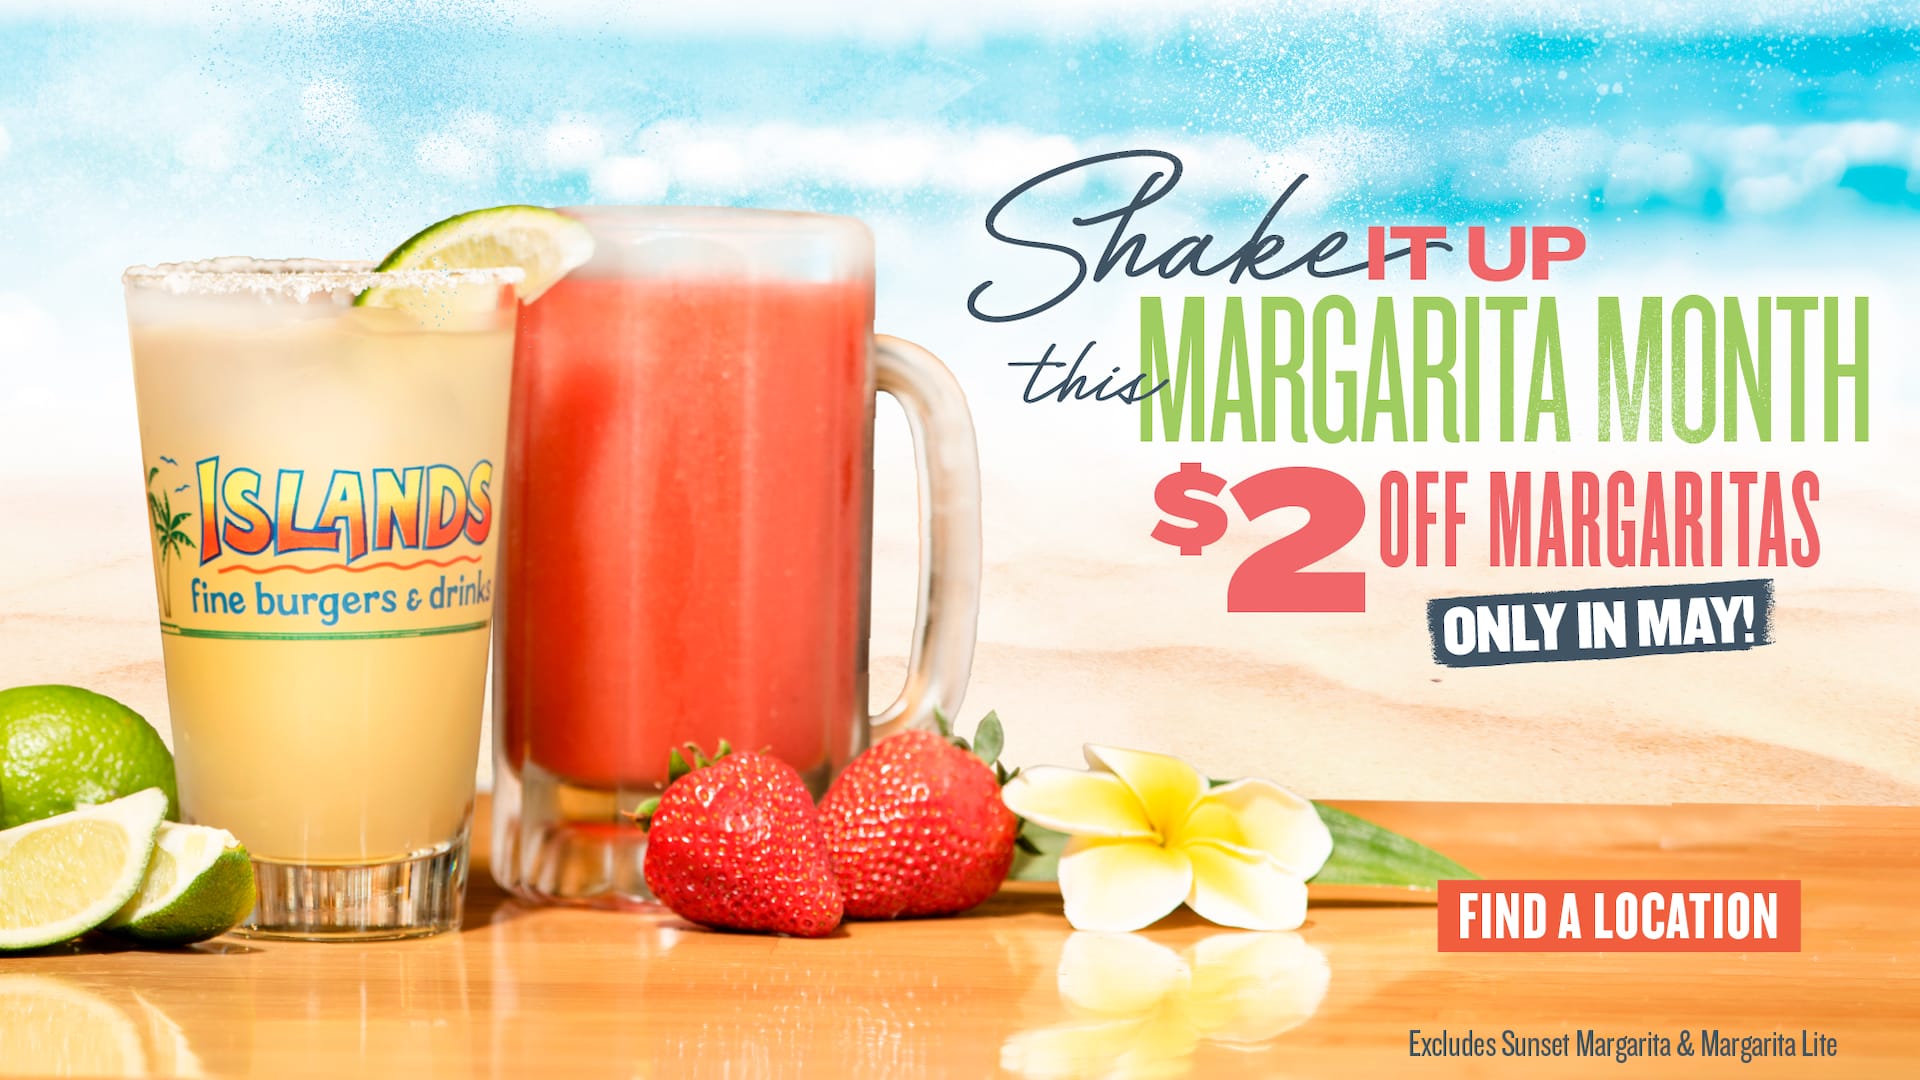 Shake it up this margarita month - $2 off margaritas only in May!